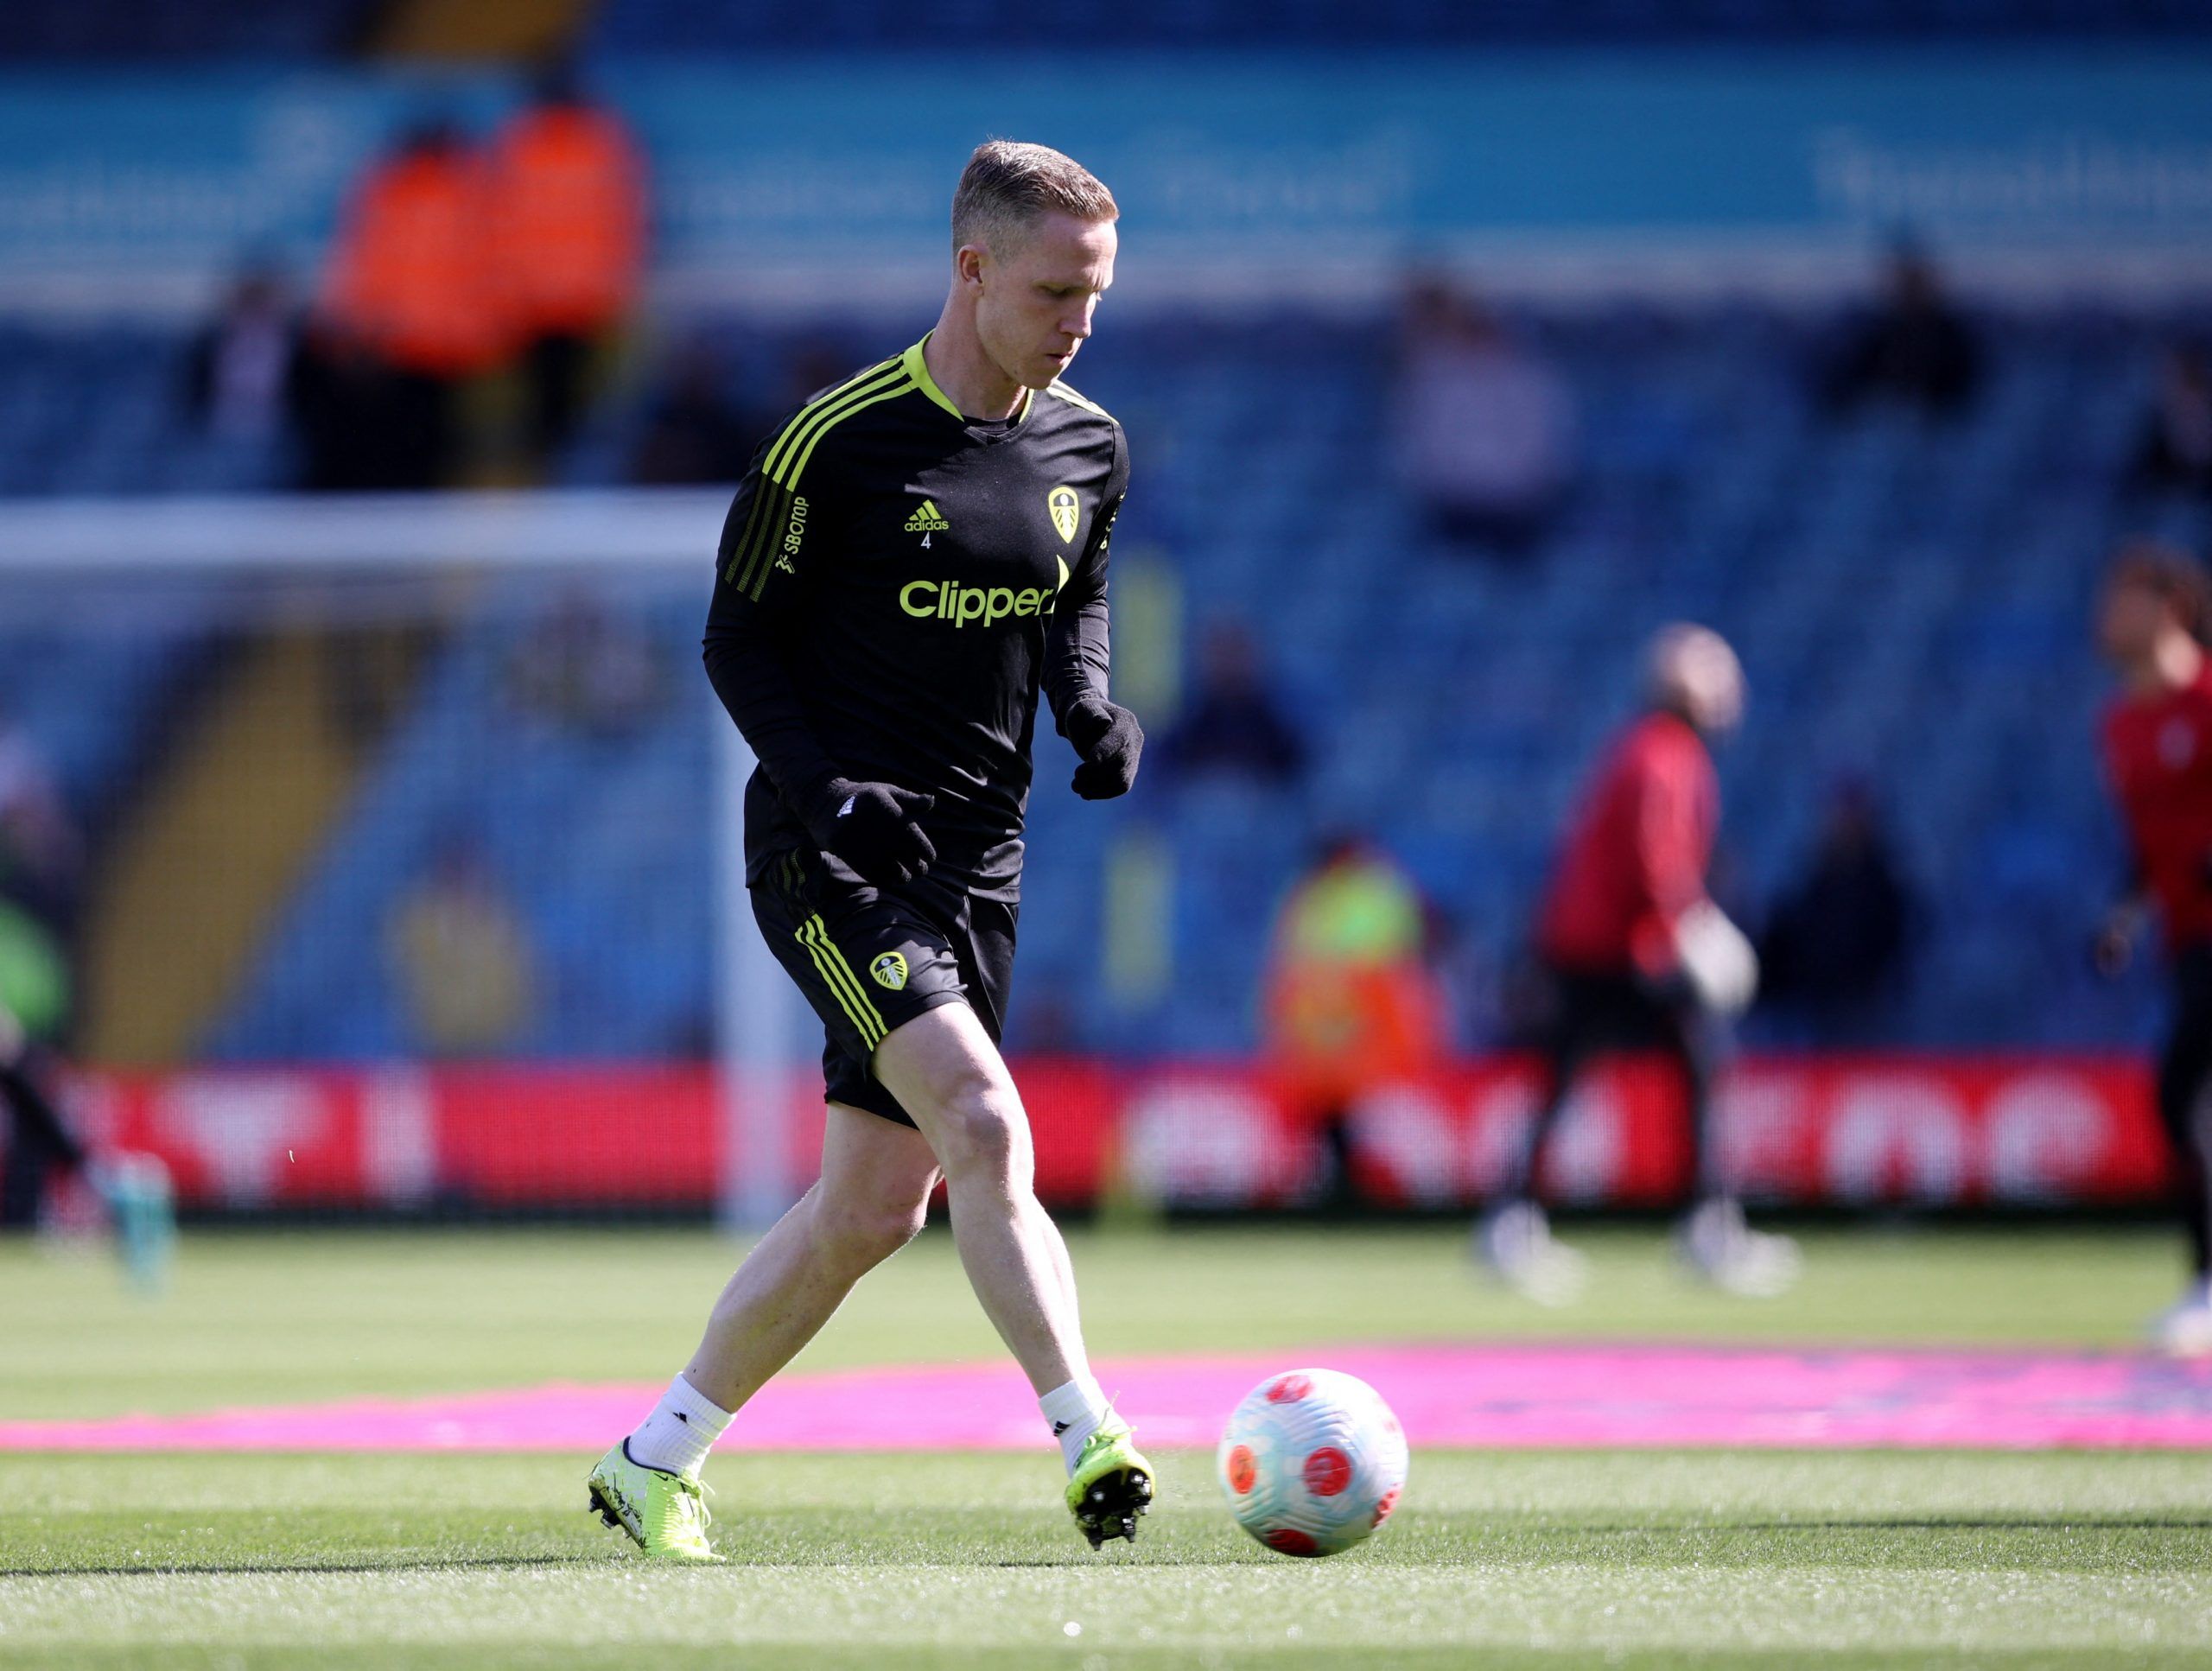 Soccer Football - Premier League - Leeds United v Southampton - Elland Road, Leeds, Britain - April 2, 2022 Leeds United's Adam Forshaw during the warm up before the match Action Images via Reuters/Molly Darlington EDITORIAL USE ONLY. No use with unauthorized audio, video, data, fixture lists, club/league logos or 'live' services. Online in-match use limited to 75 images, no video emulation. No use in betting, games or single club /league/player publications.  Please contact your account represe